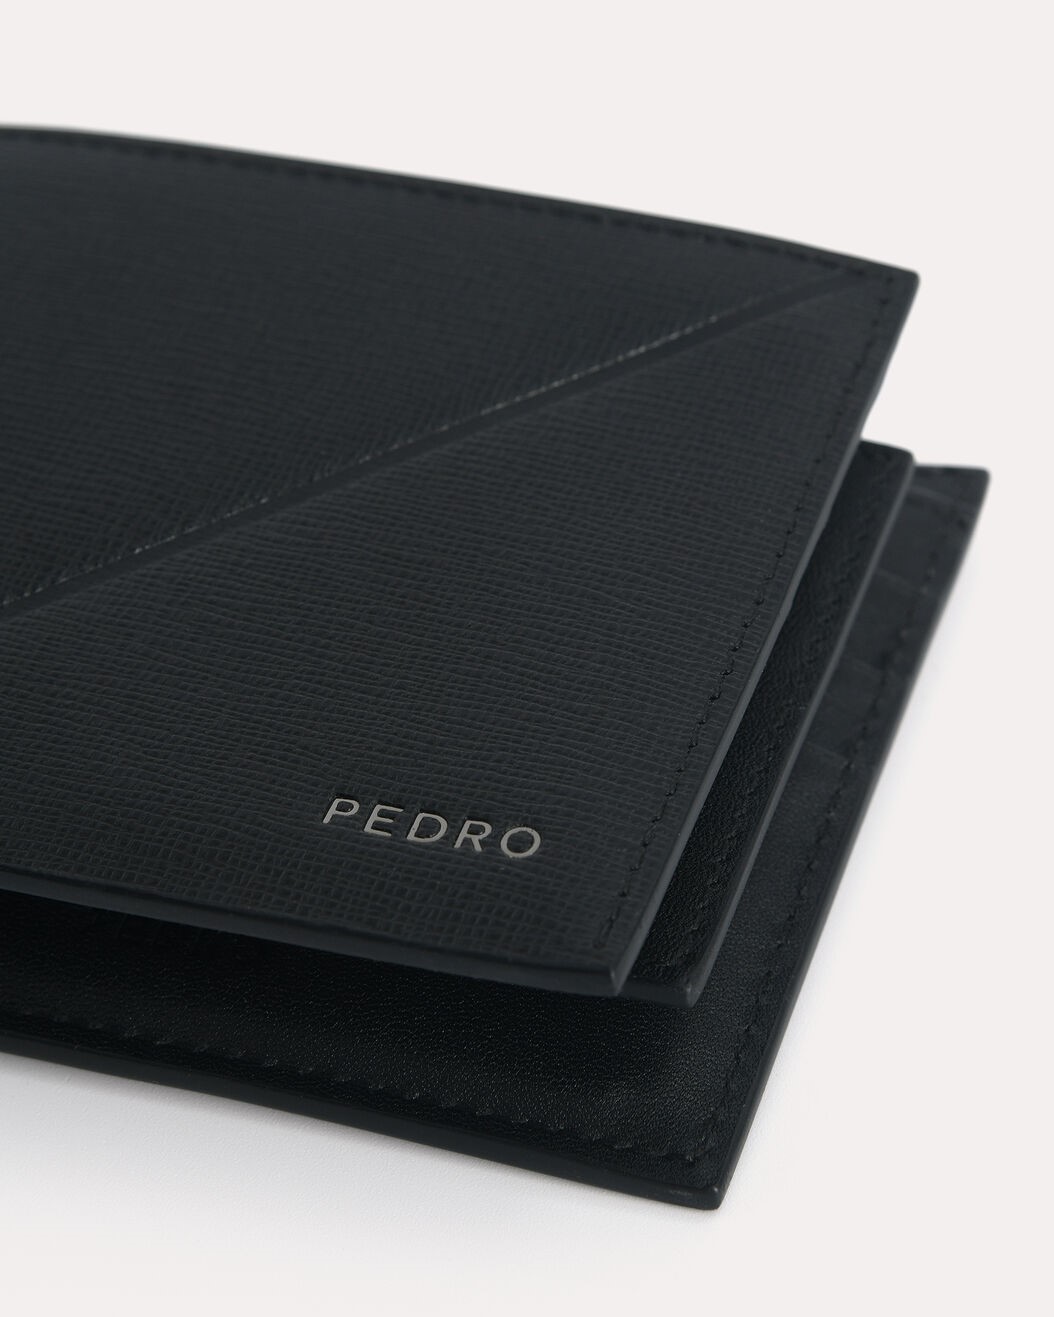  VÍ NAM PEDRO TEXTURED LEATHER BI-FOLD WALLET WITH INSERT 8